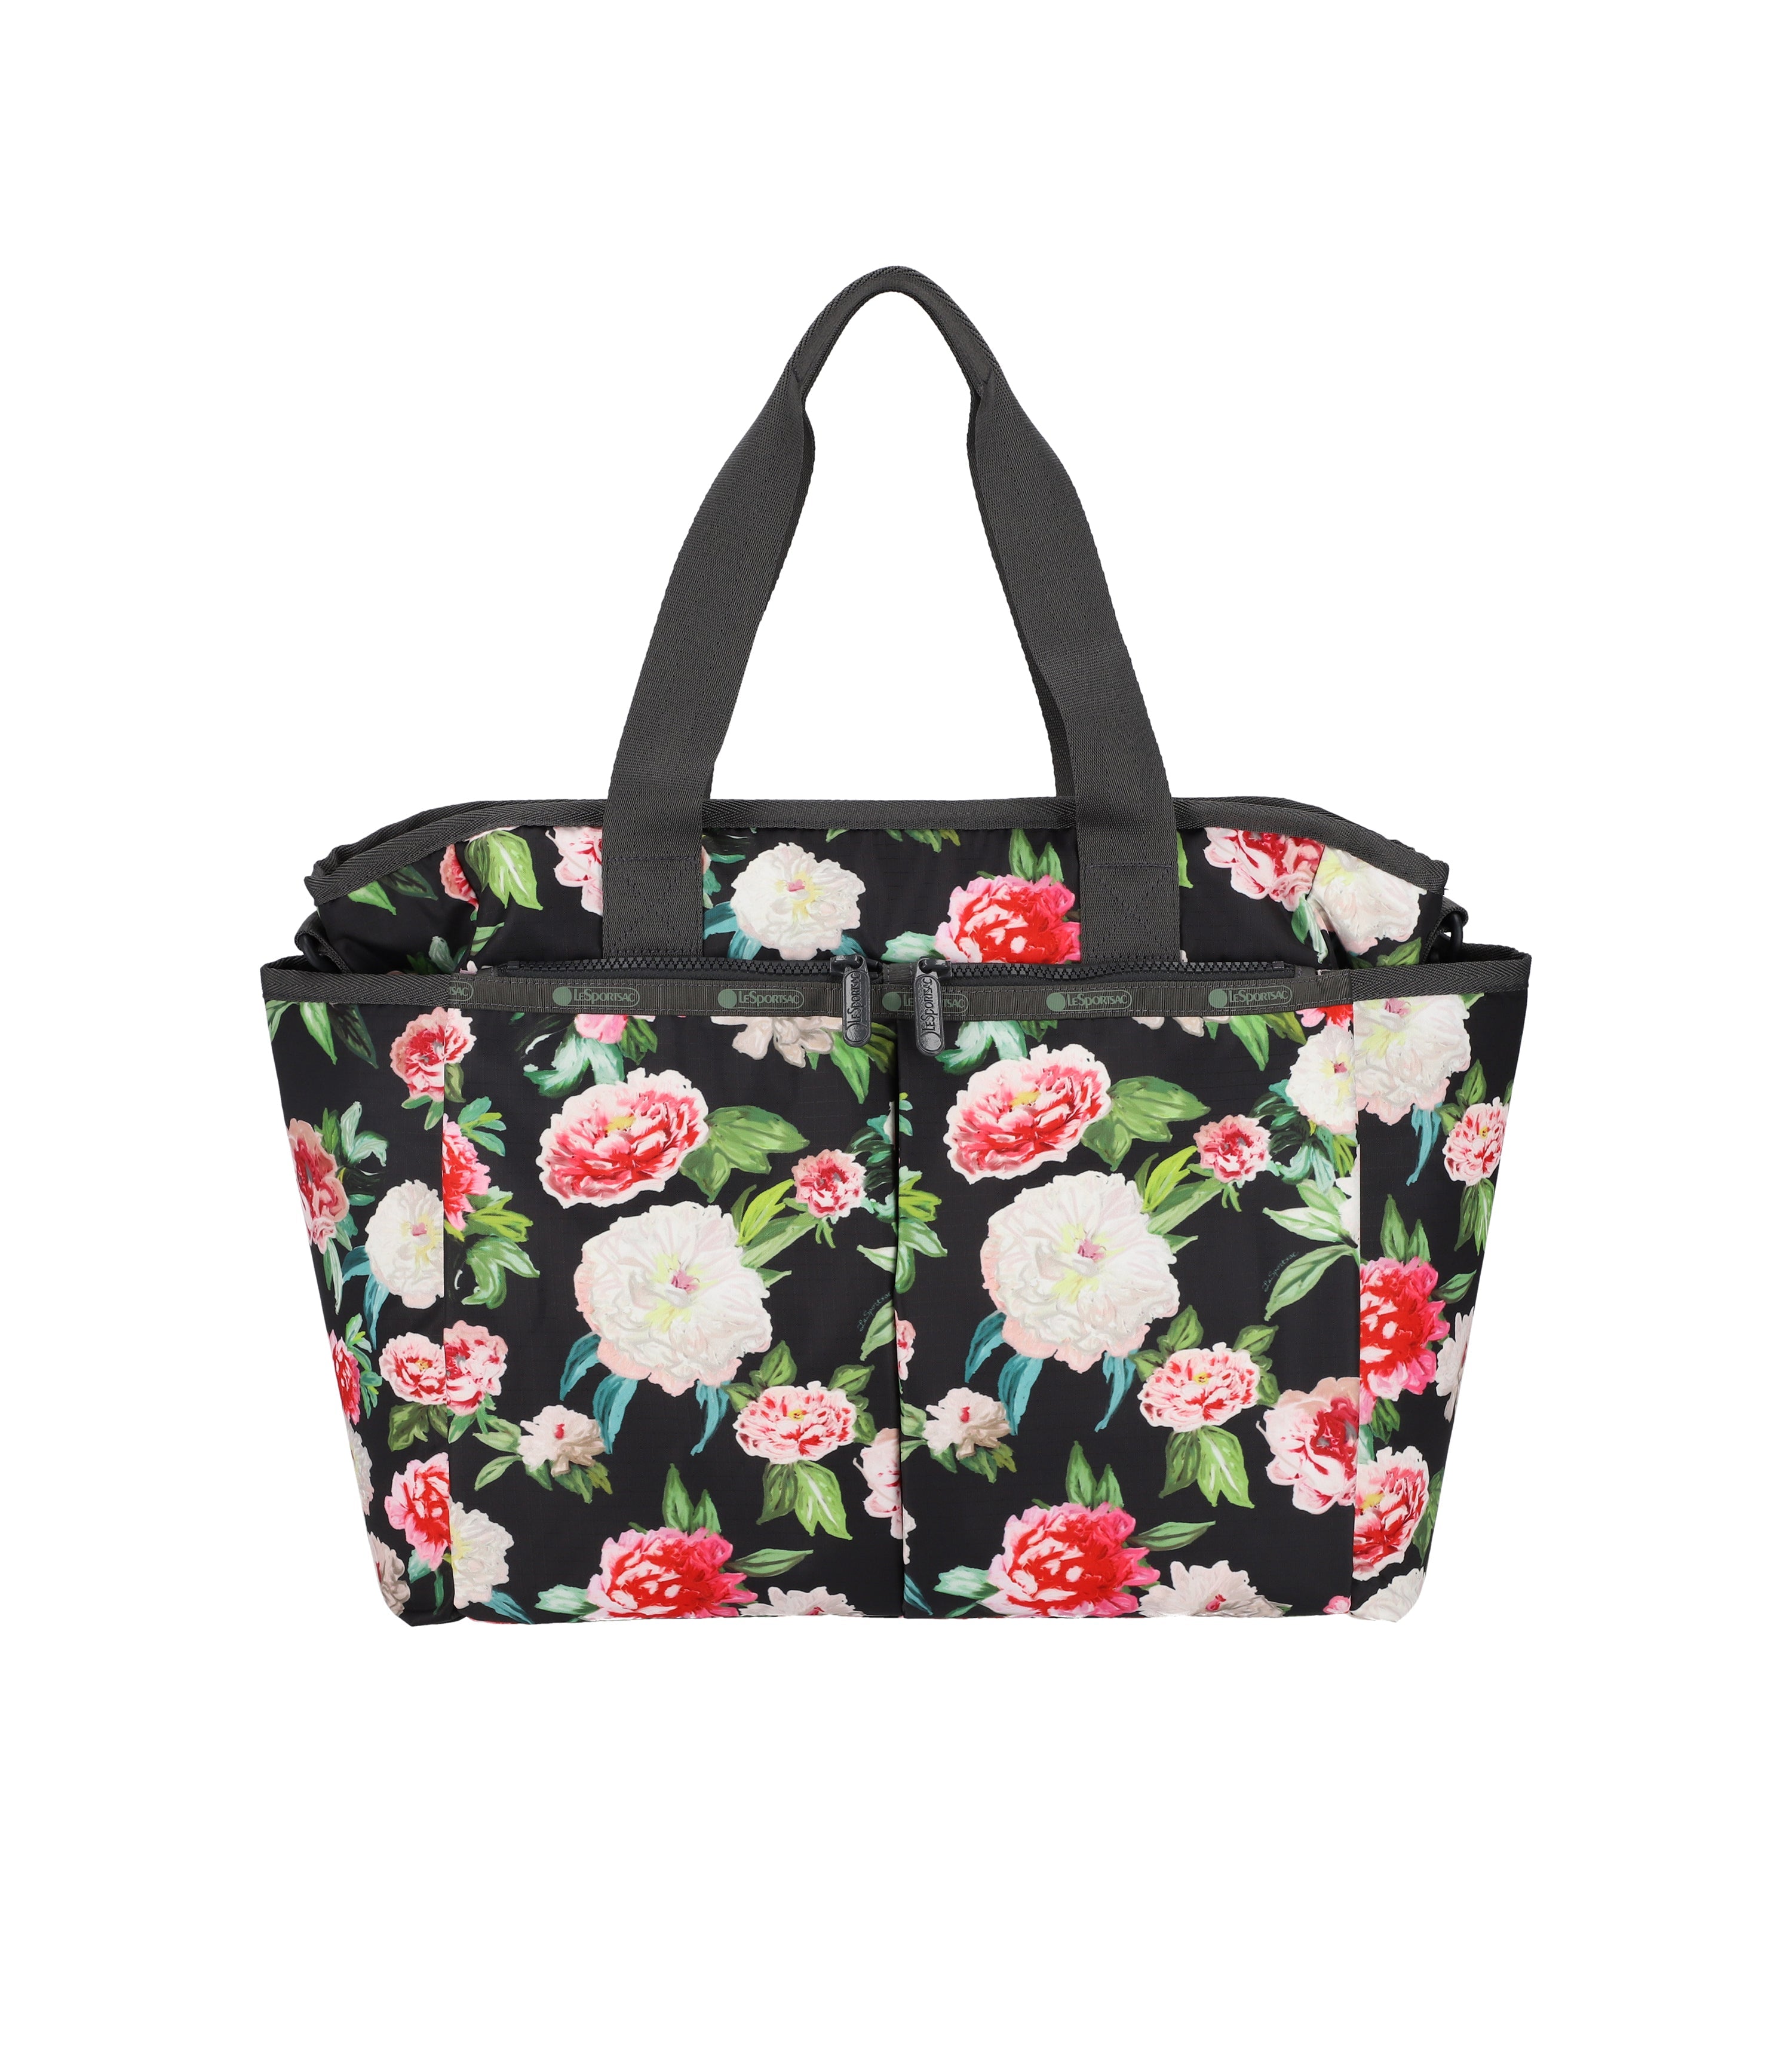 Lesportsac Floral Party Tote